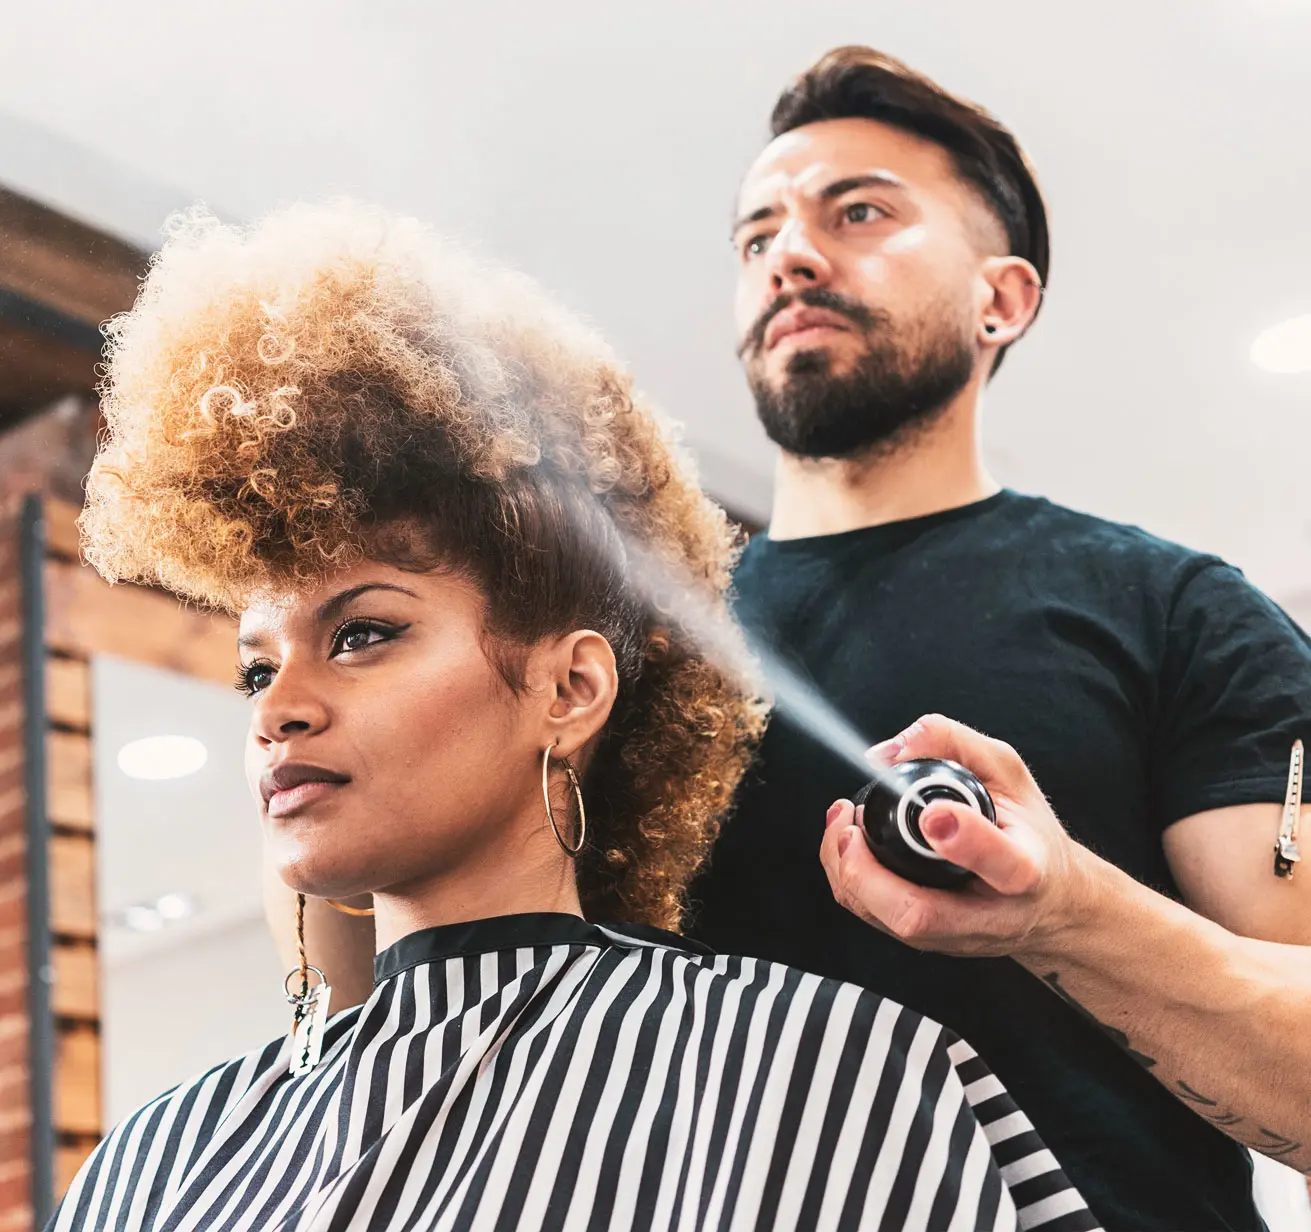 Salon Loyalty Programs and Customer Engagement | Clover